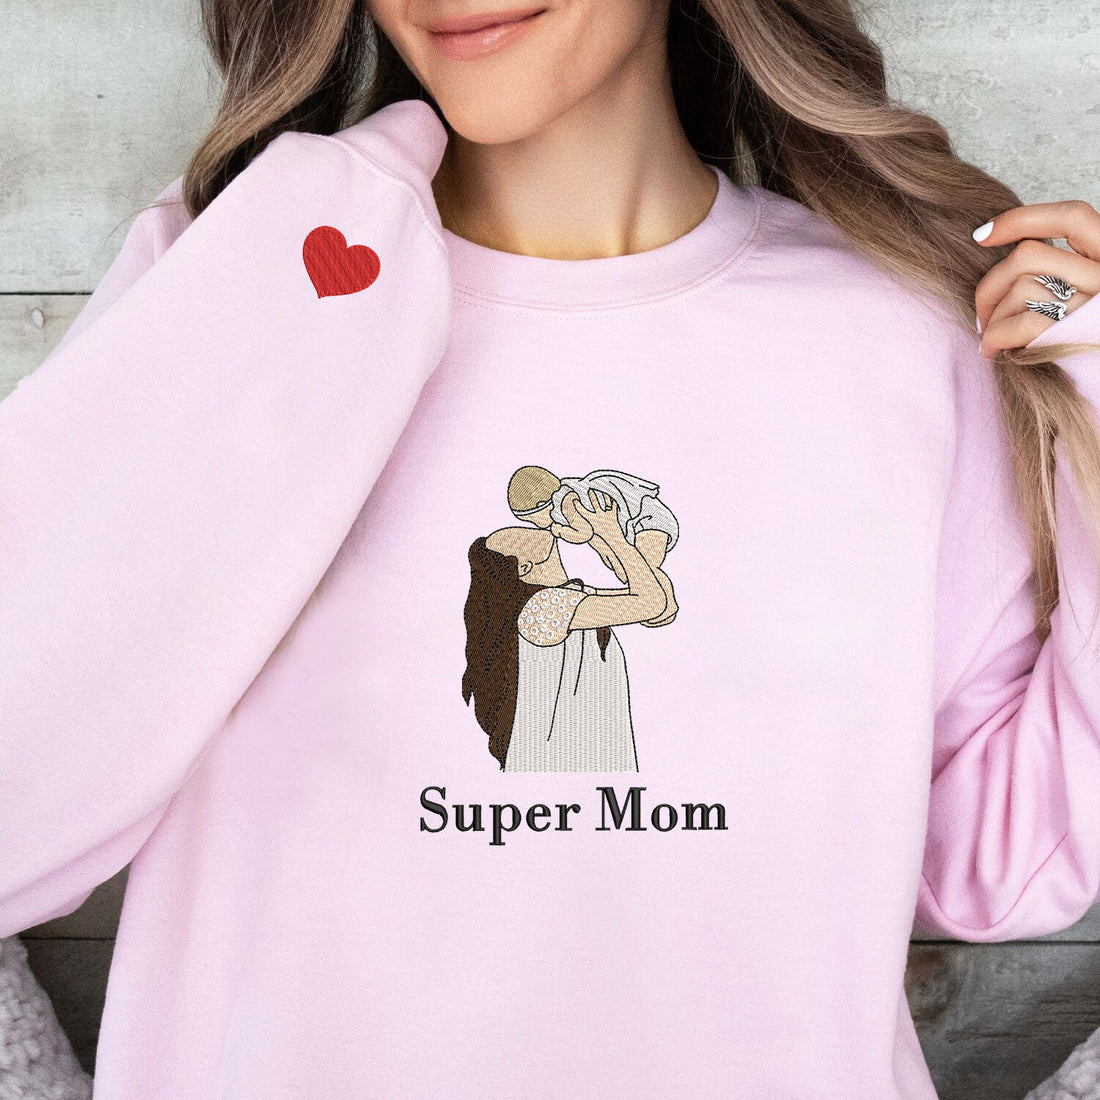 Custom Embroidered Portrait Sweatshirt, Embroidered gift for Mother's Day, Personalized Mom and Daughter, Custom Embroidered Sweatshirt